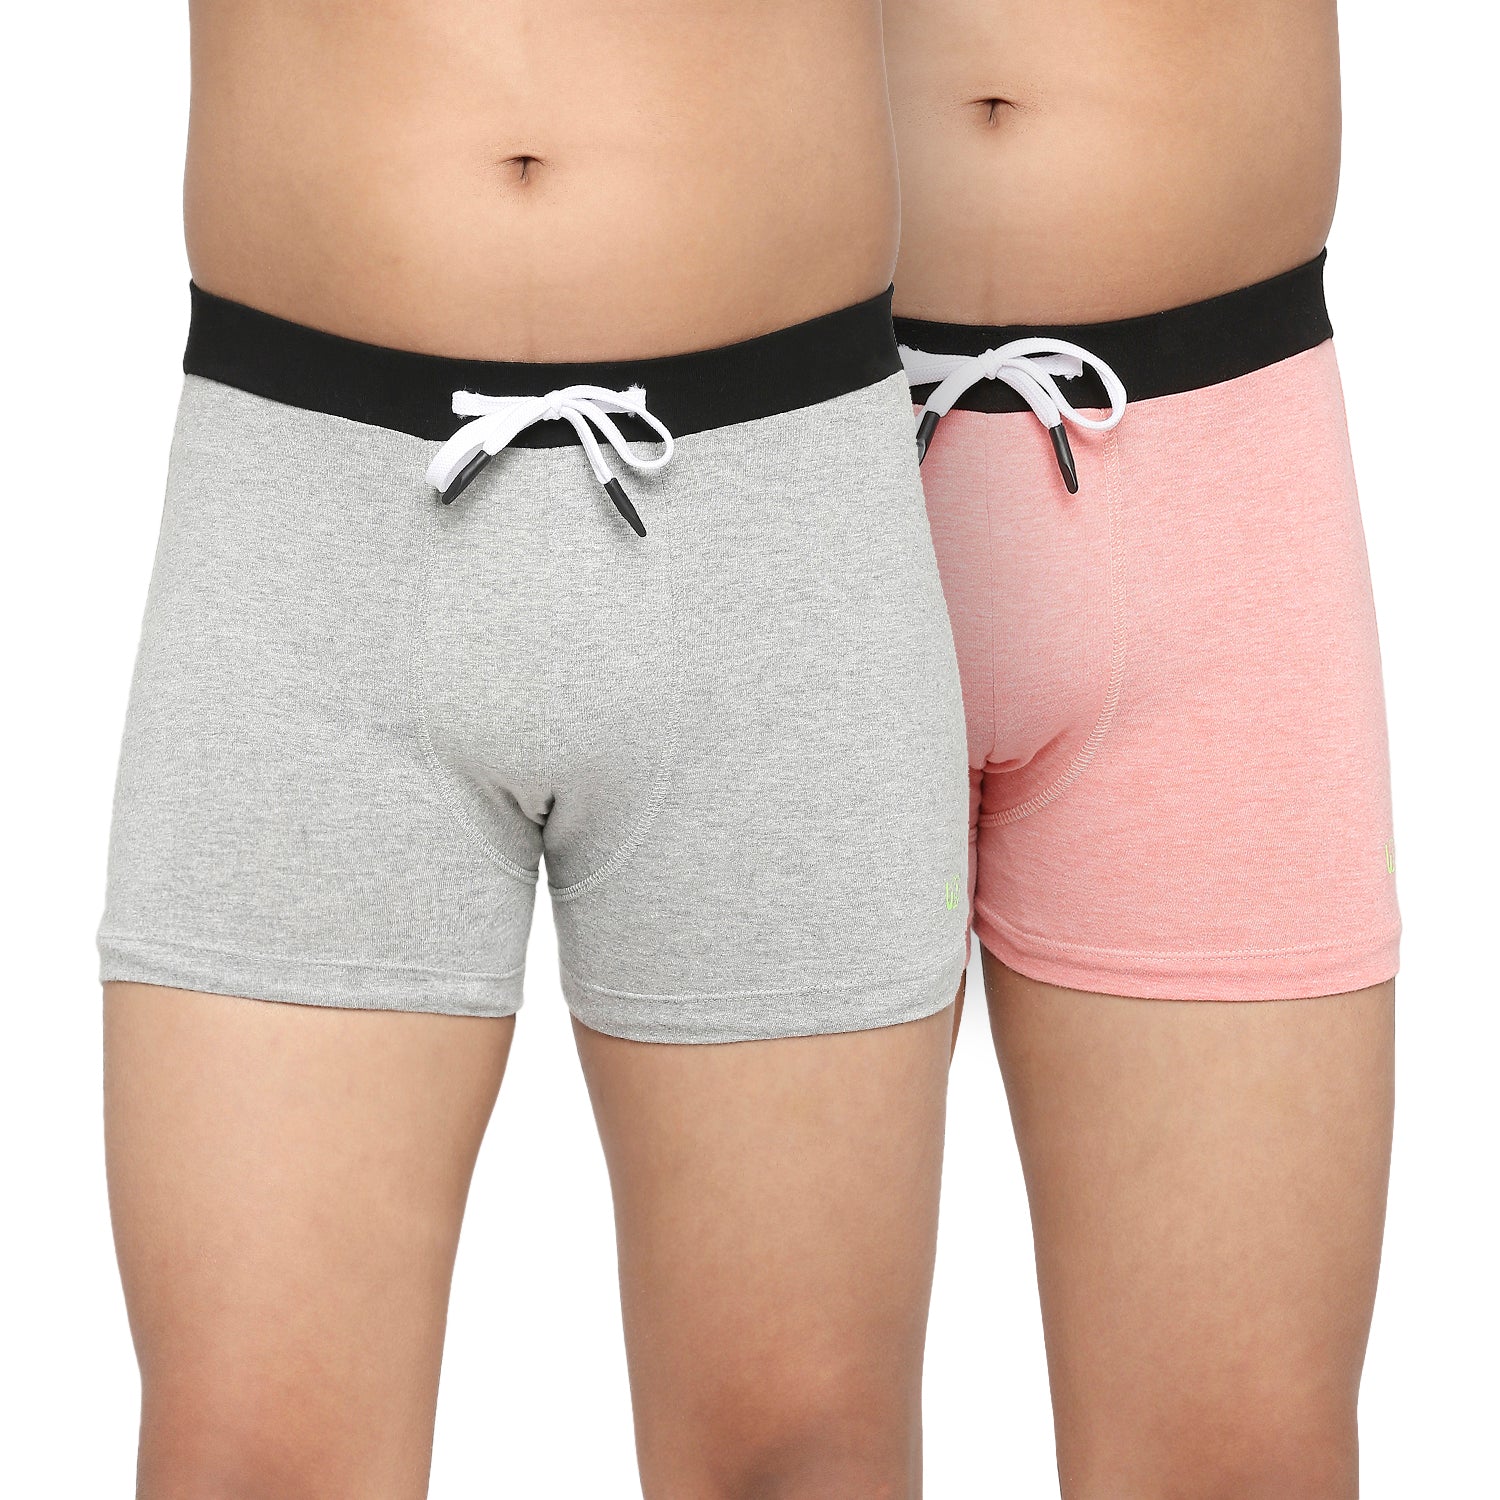 FRENCHIE Teenagers Cotton Trunk Light Gray and Pink - Pack of 2